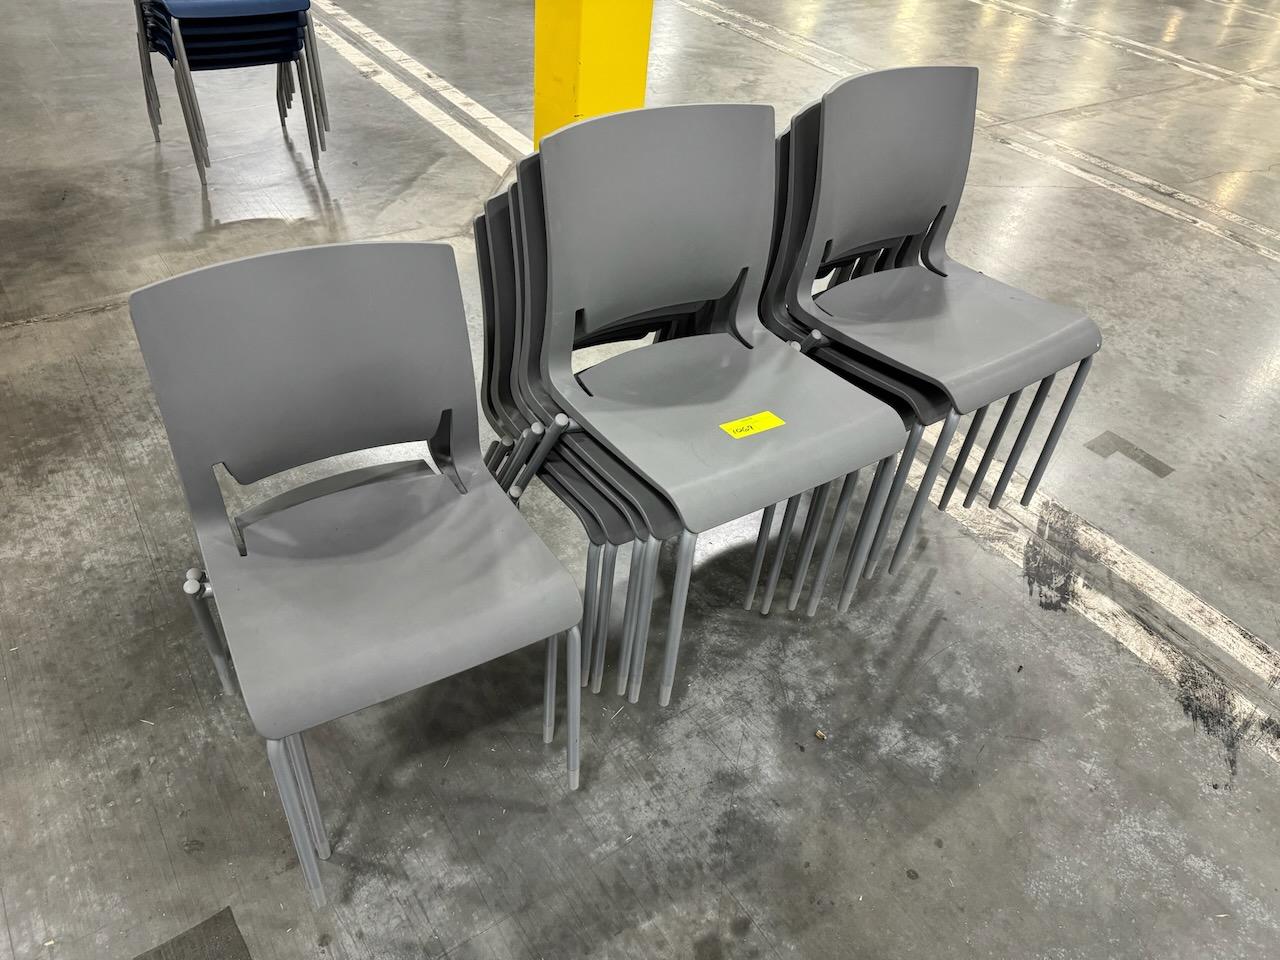 Stackable Chairs